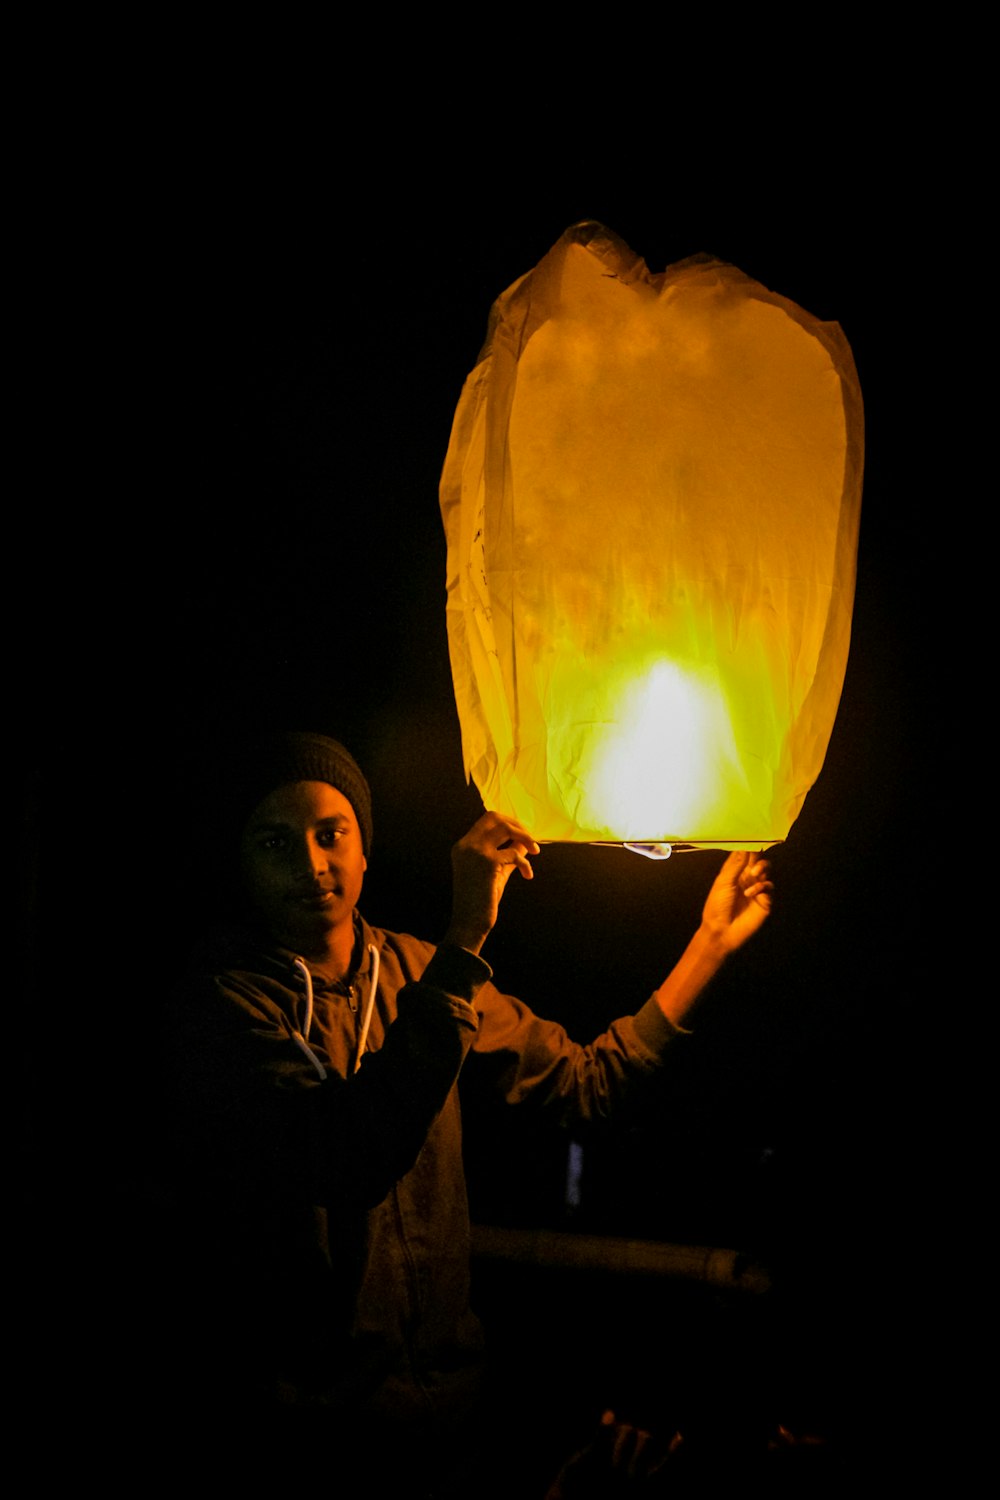 man holding a lighted paper lantern